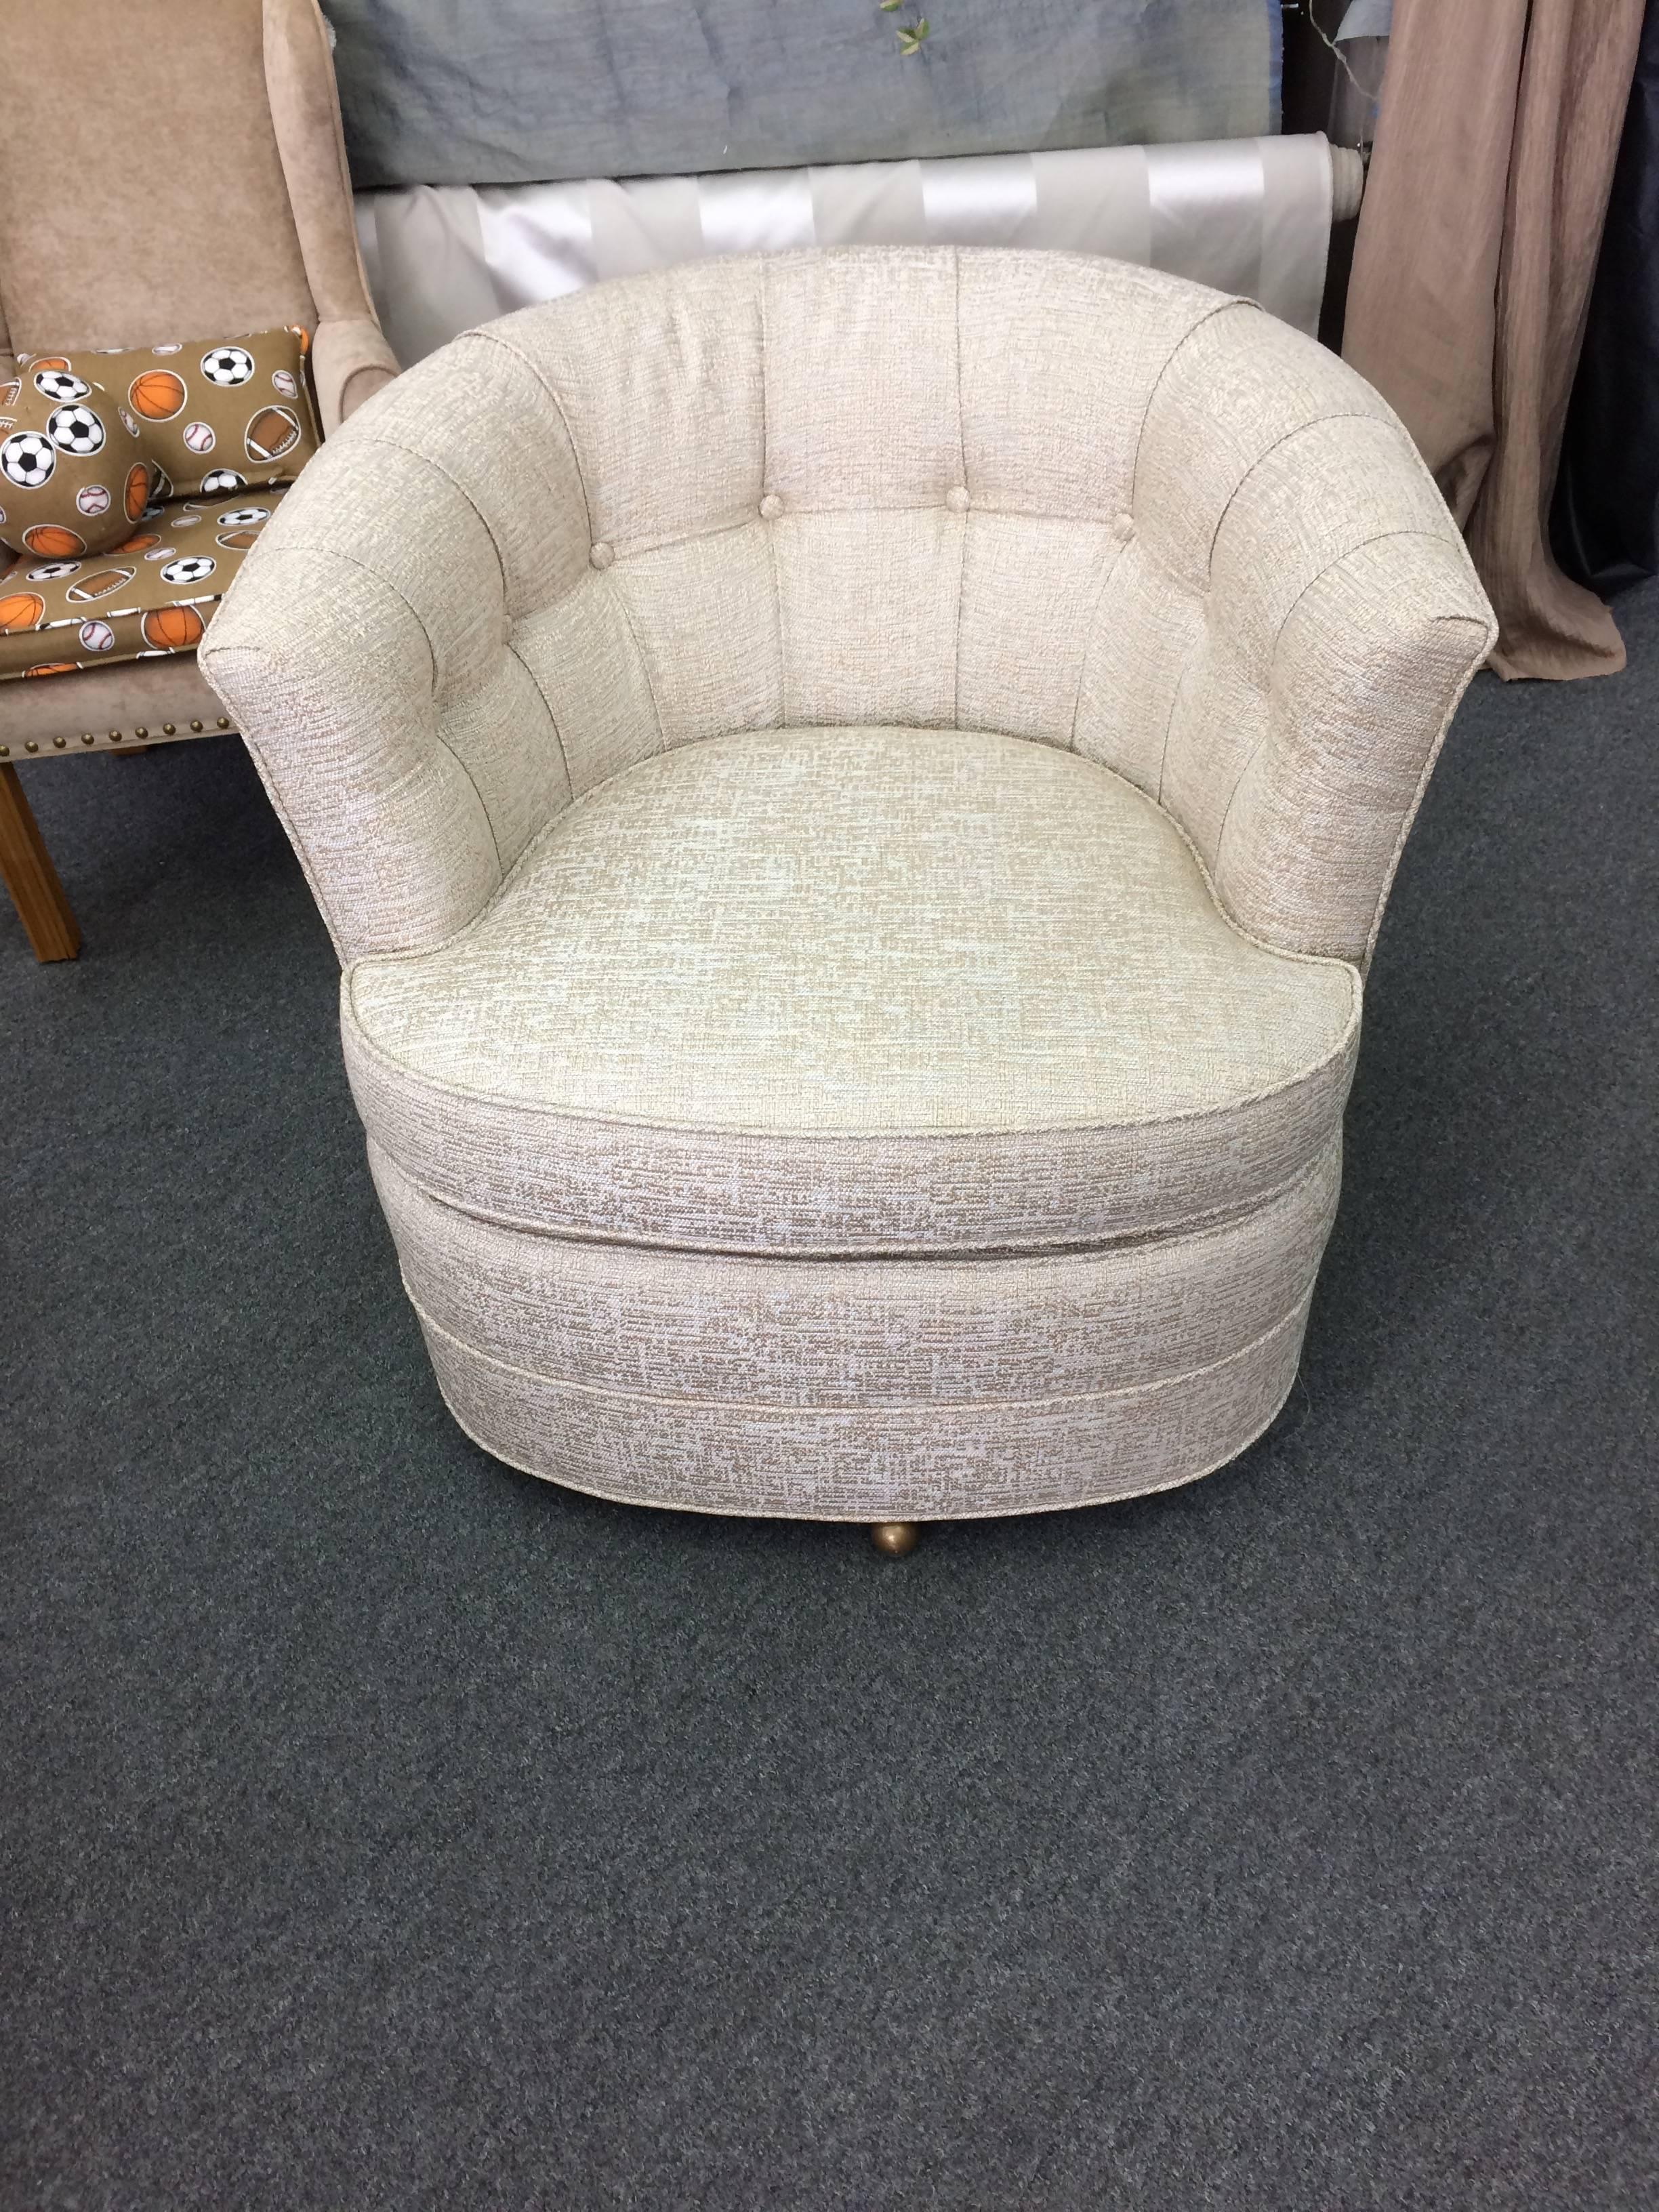 Two comfortable medium sized sexy swivel chairs from the 1960s having tufted backs and brass ball feet, that swivel easily 360 degrees. Fresh from the upholsterer in a retro style textured tone on tone weave, off-white.